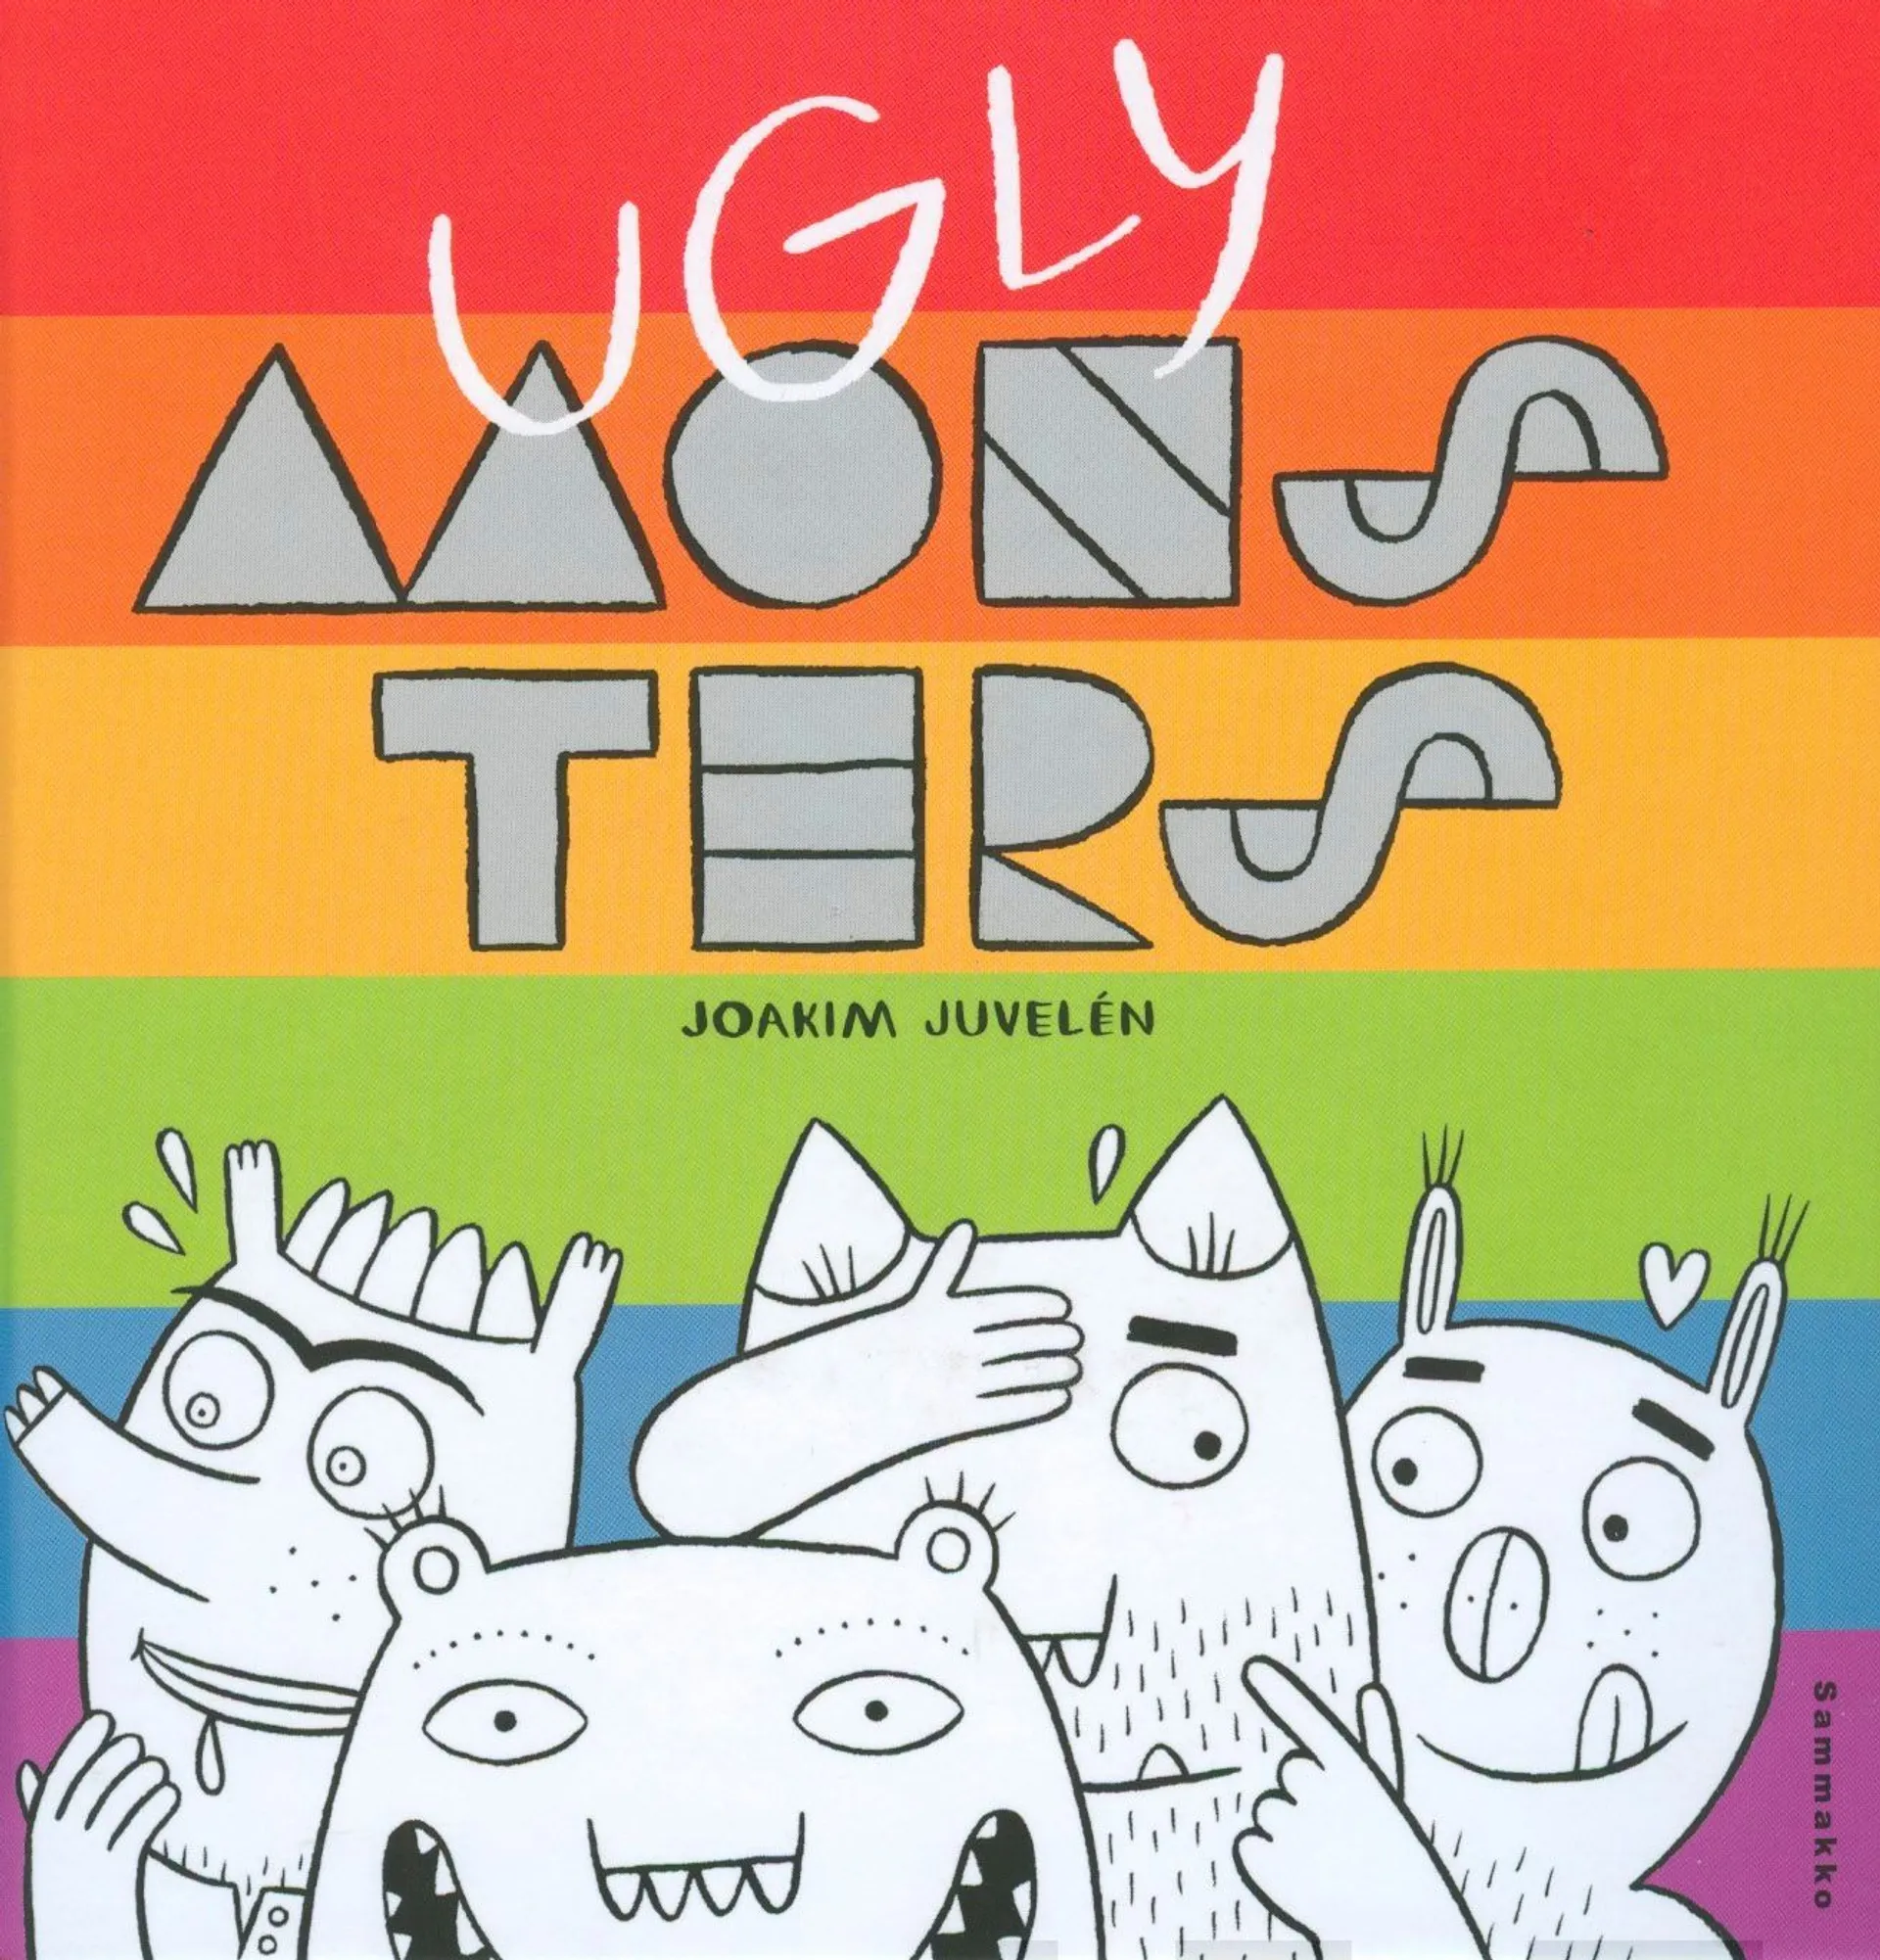 Juvelén, Ugly Monsters